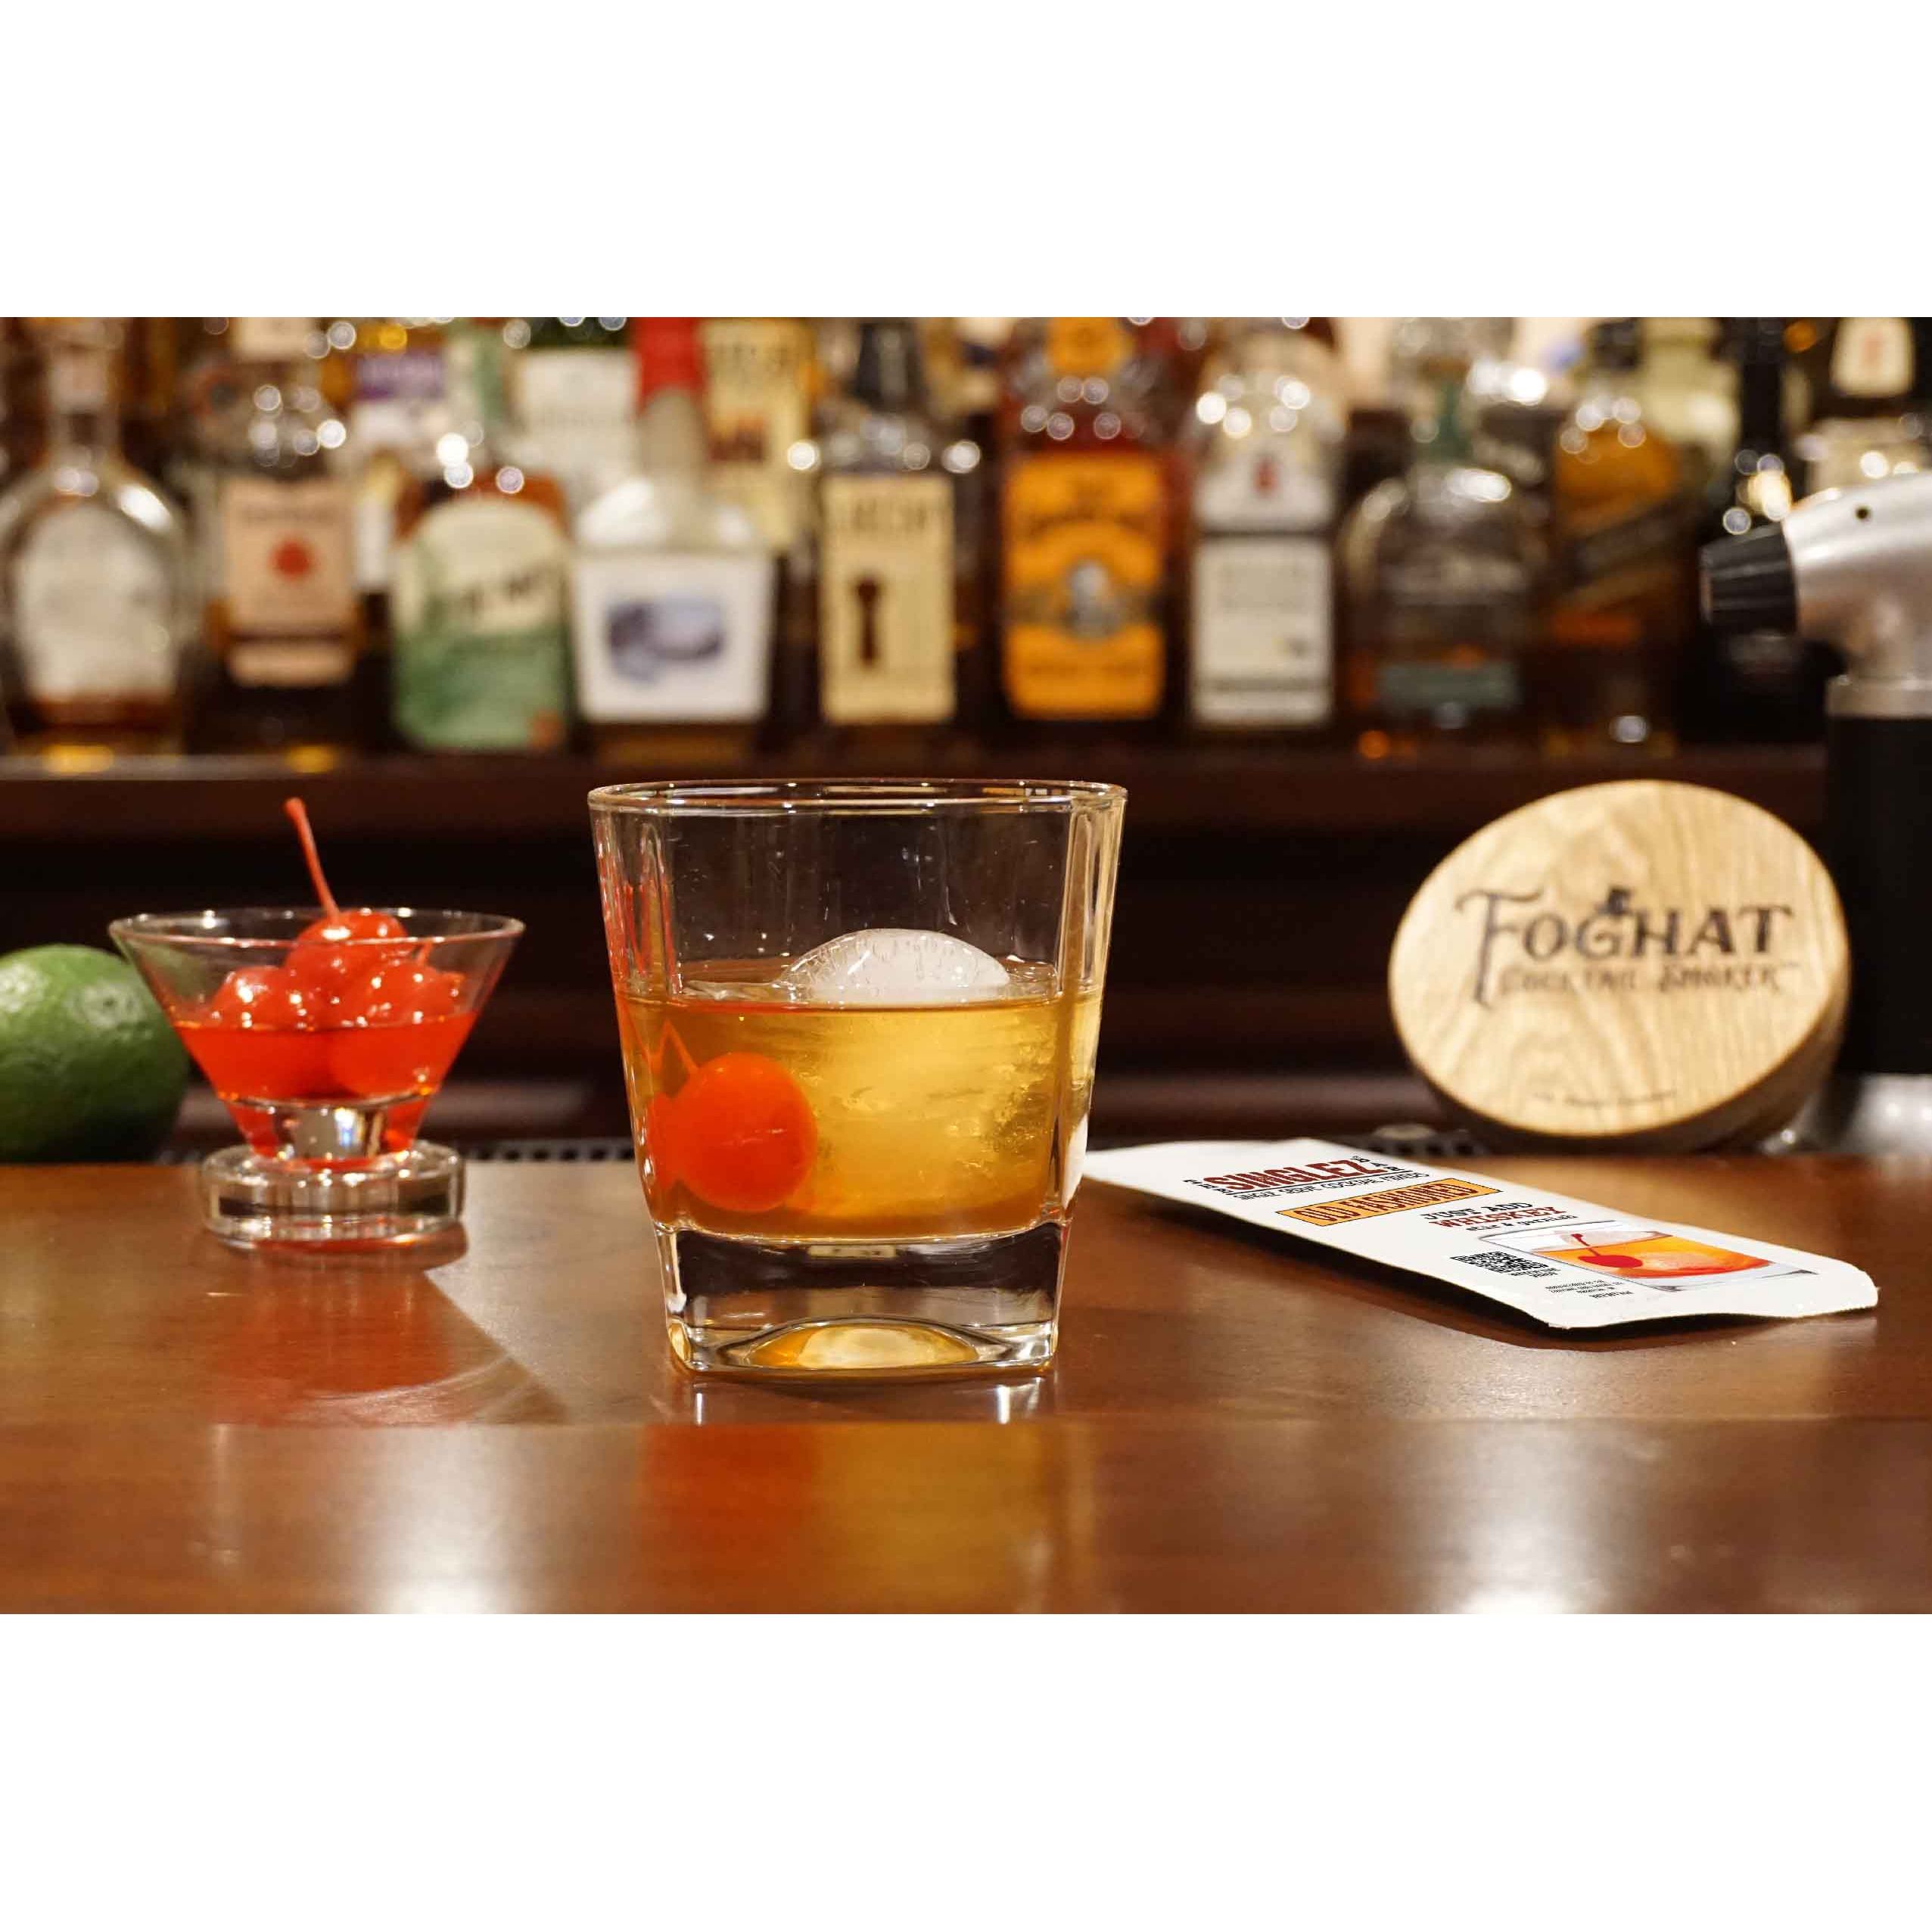 Foghat Smoked Old Fashioned Cocktail Kit – Old West Smoke